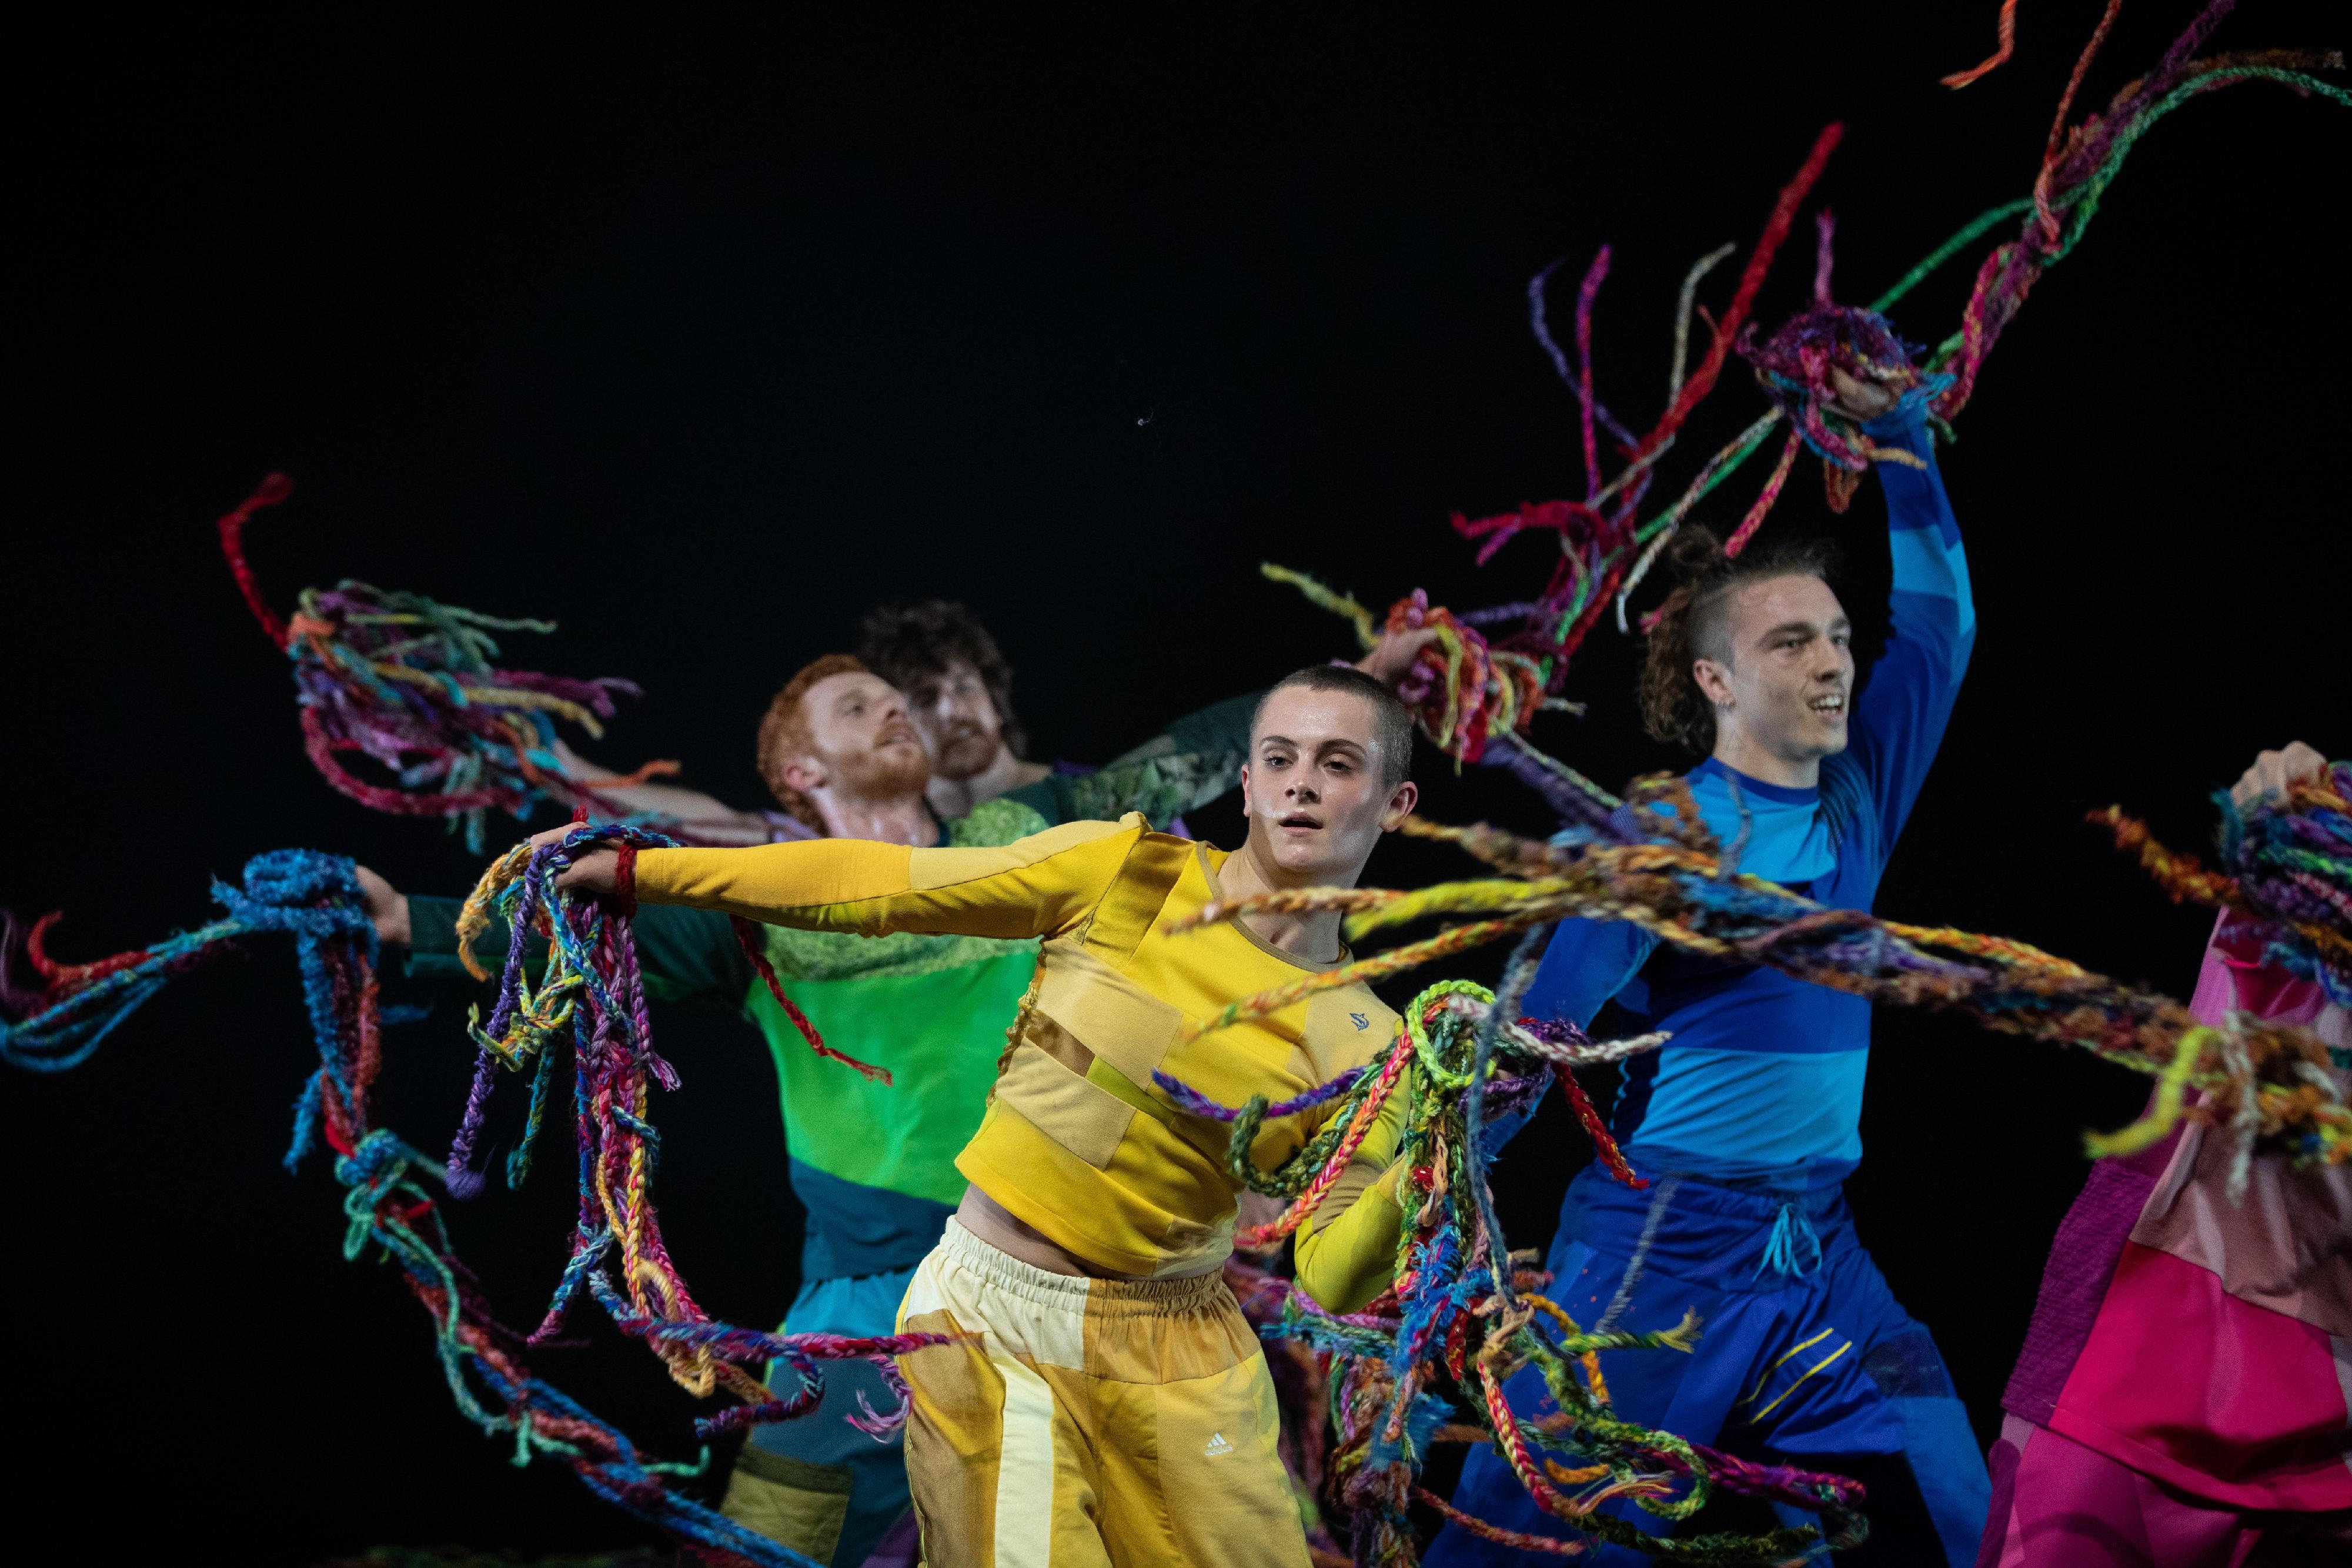 The Leisure and Cultural Services Department will present "Wayfinder" by Dancenorth Australia in September. Photo shows "Wayfinder" by Dancenorth Australia. (Source of photo: David Kelly)